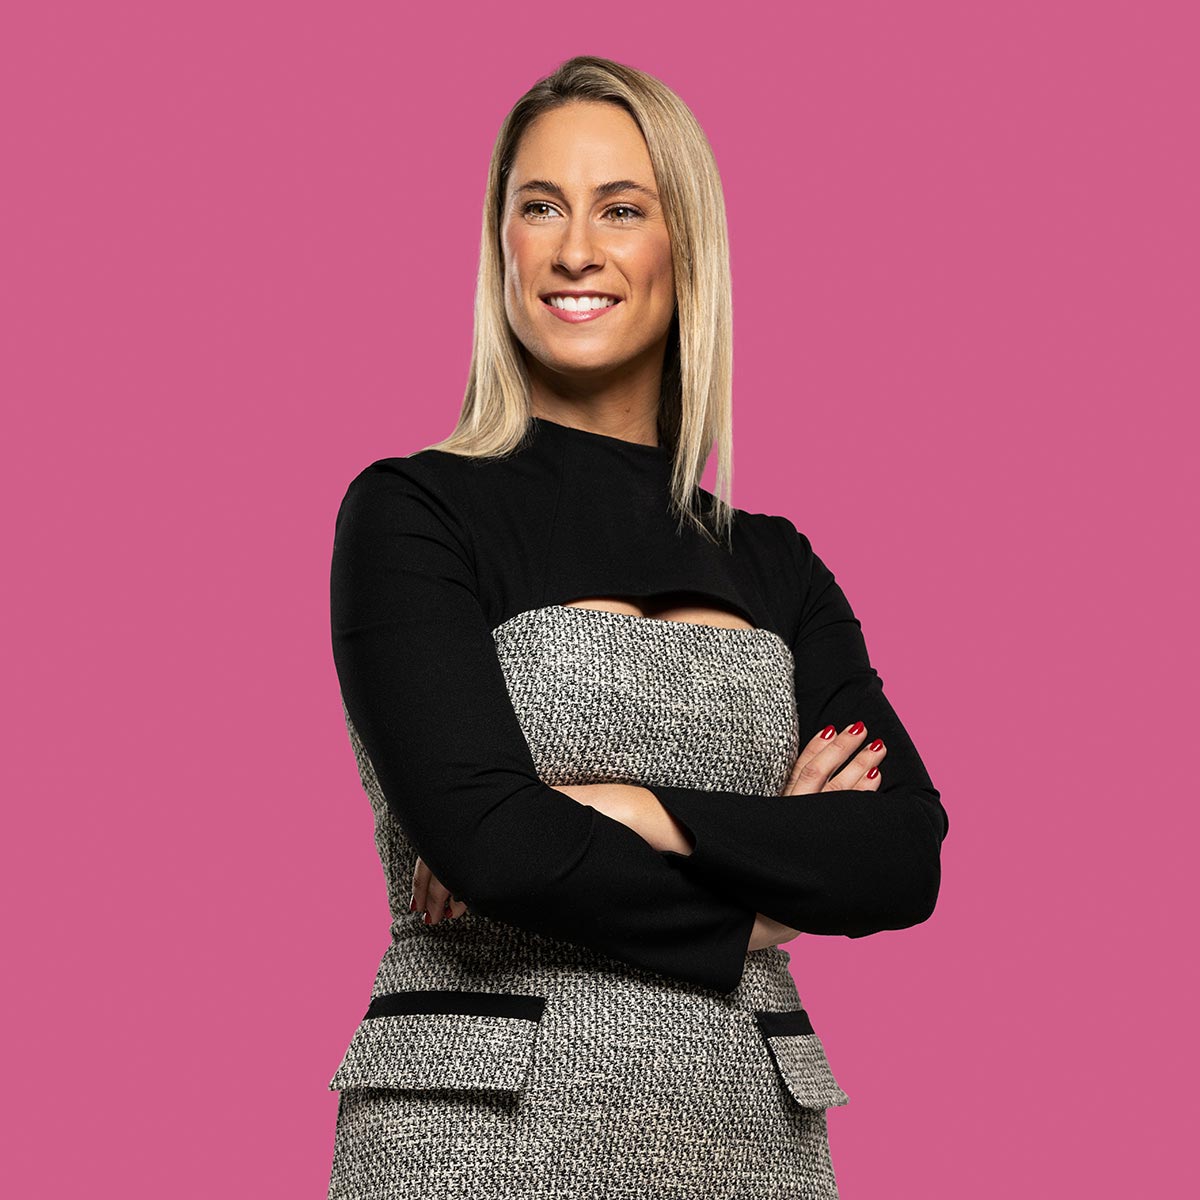 Studio feature portrait of female real estate auctioneer smiling arms folded looking off camera on pink background